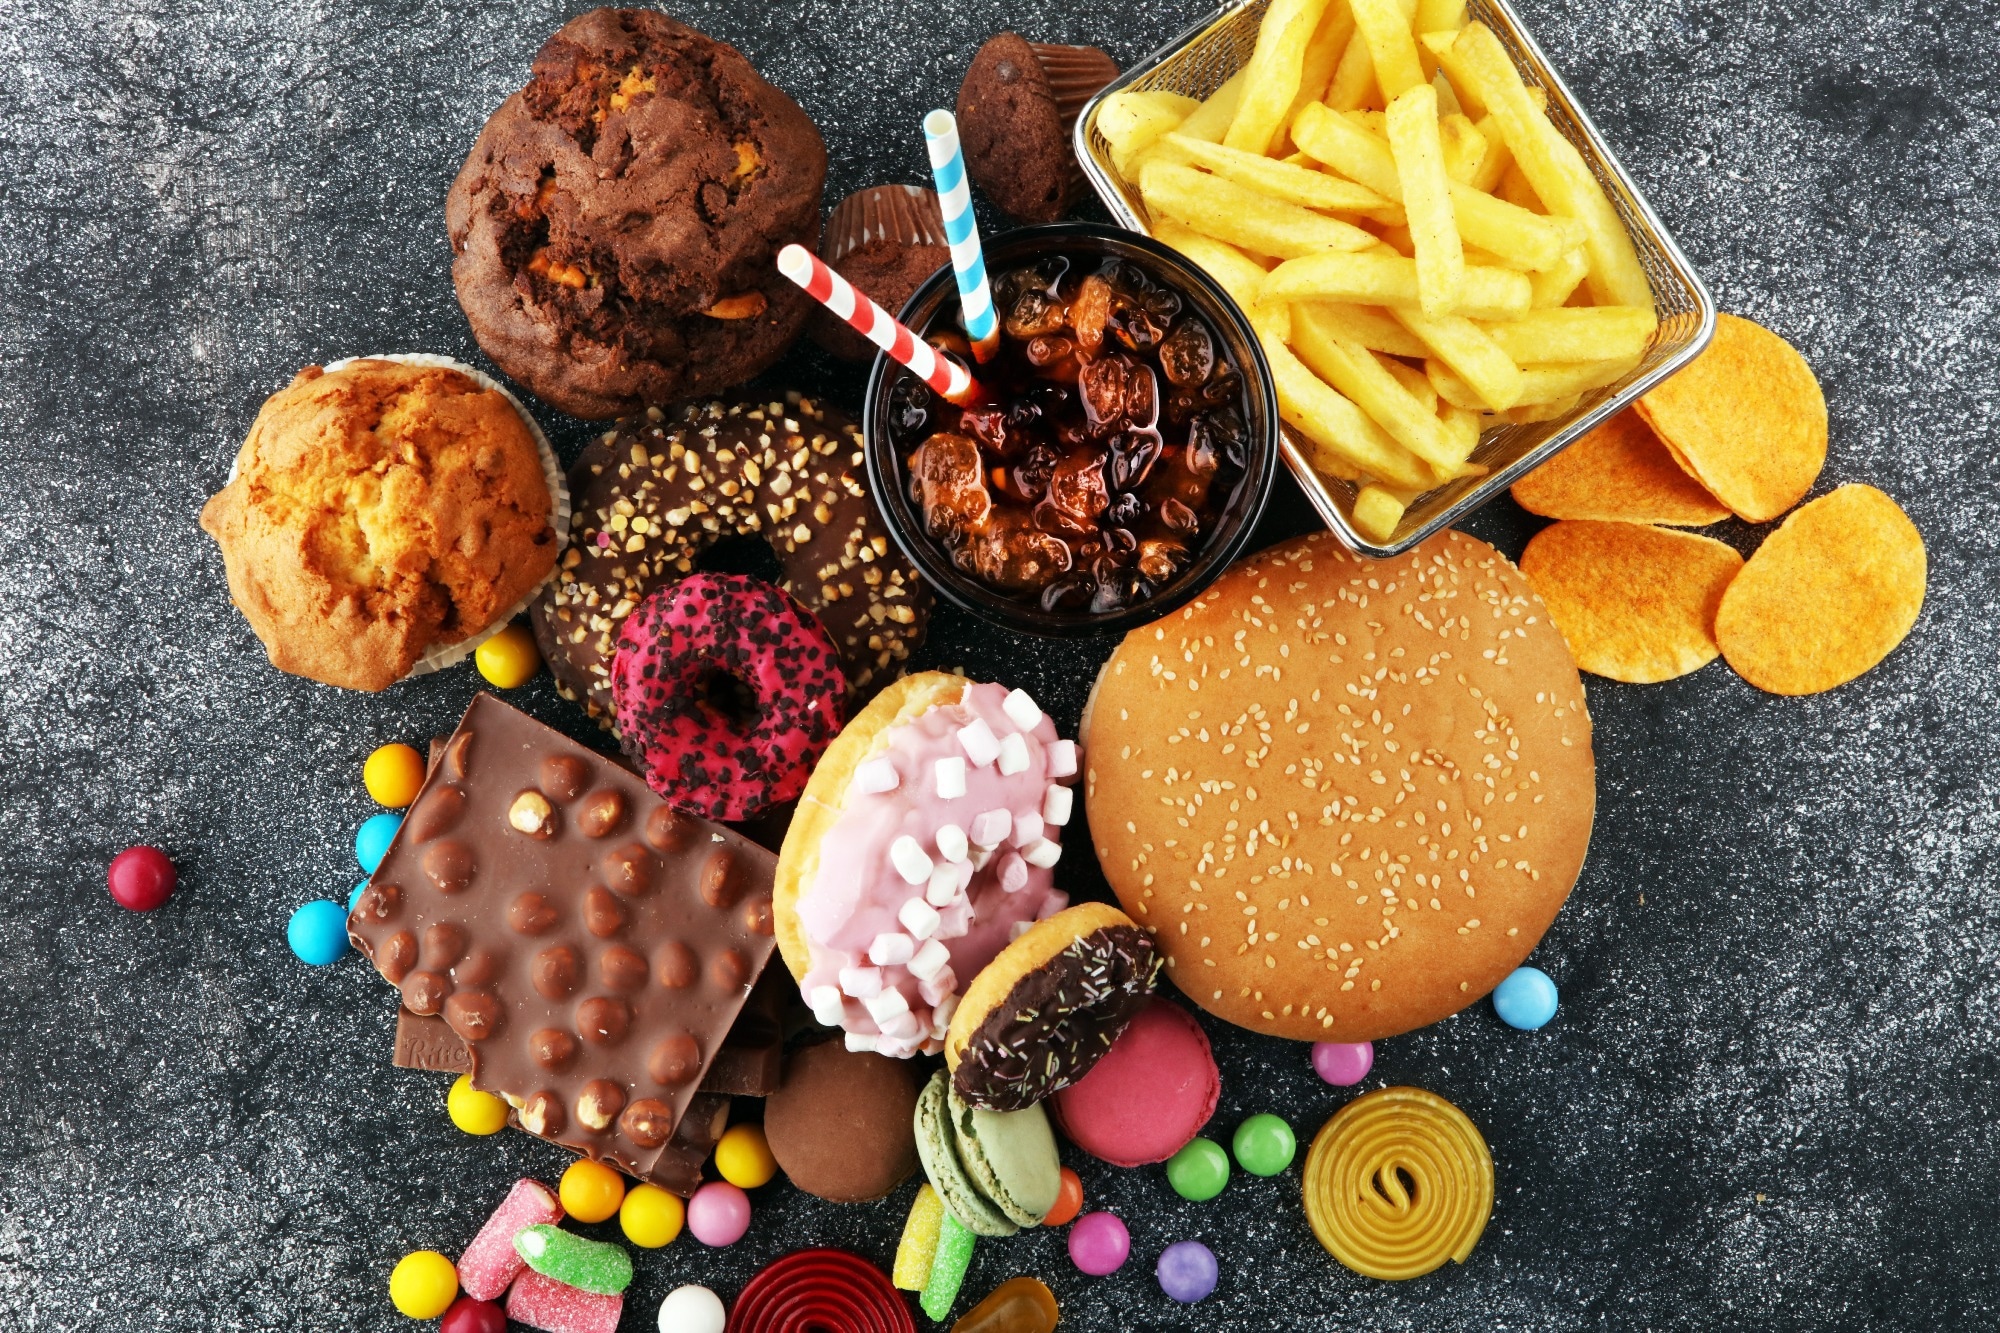 Review: Ultra-Processed Foods and Obesity Risk: A Critical Review of Reported Mechanisms. Image Credit: beats1 / Shutterstock